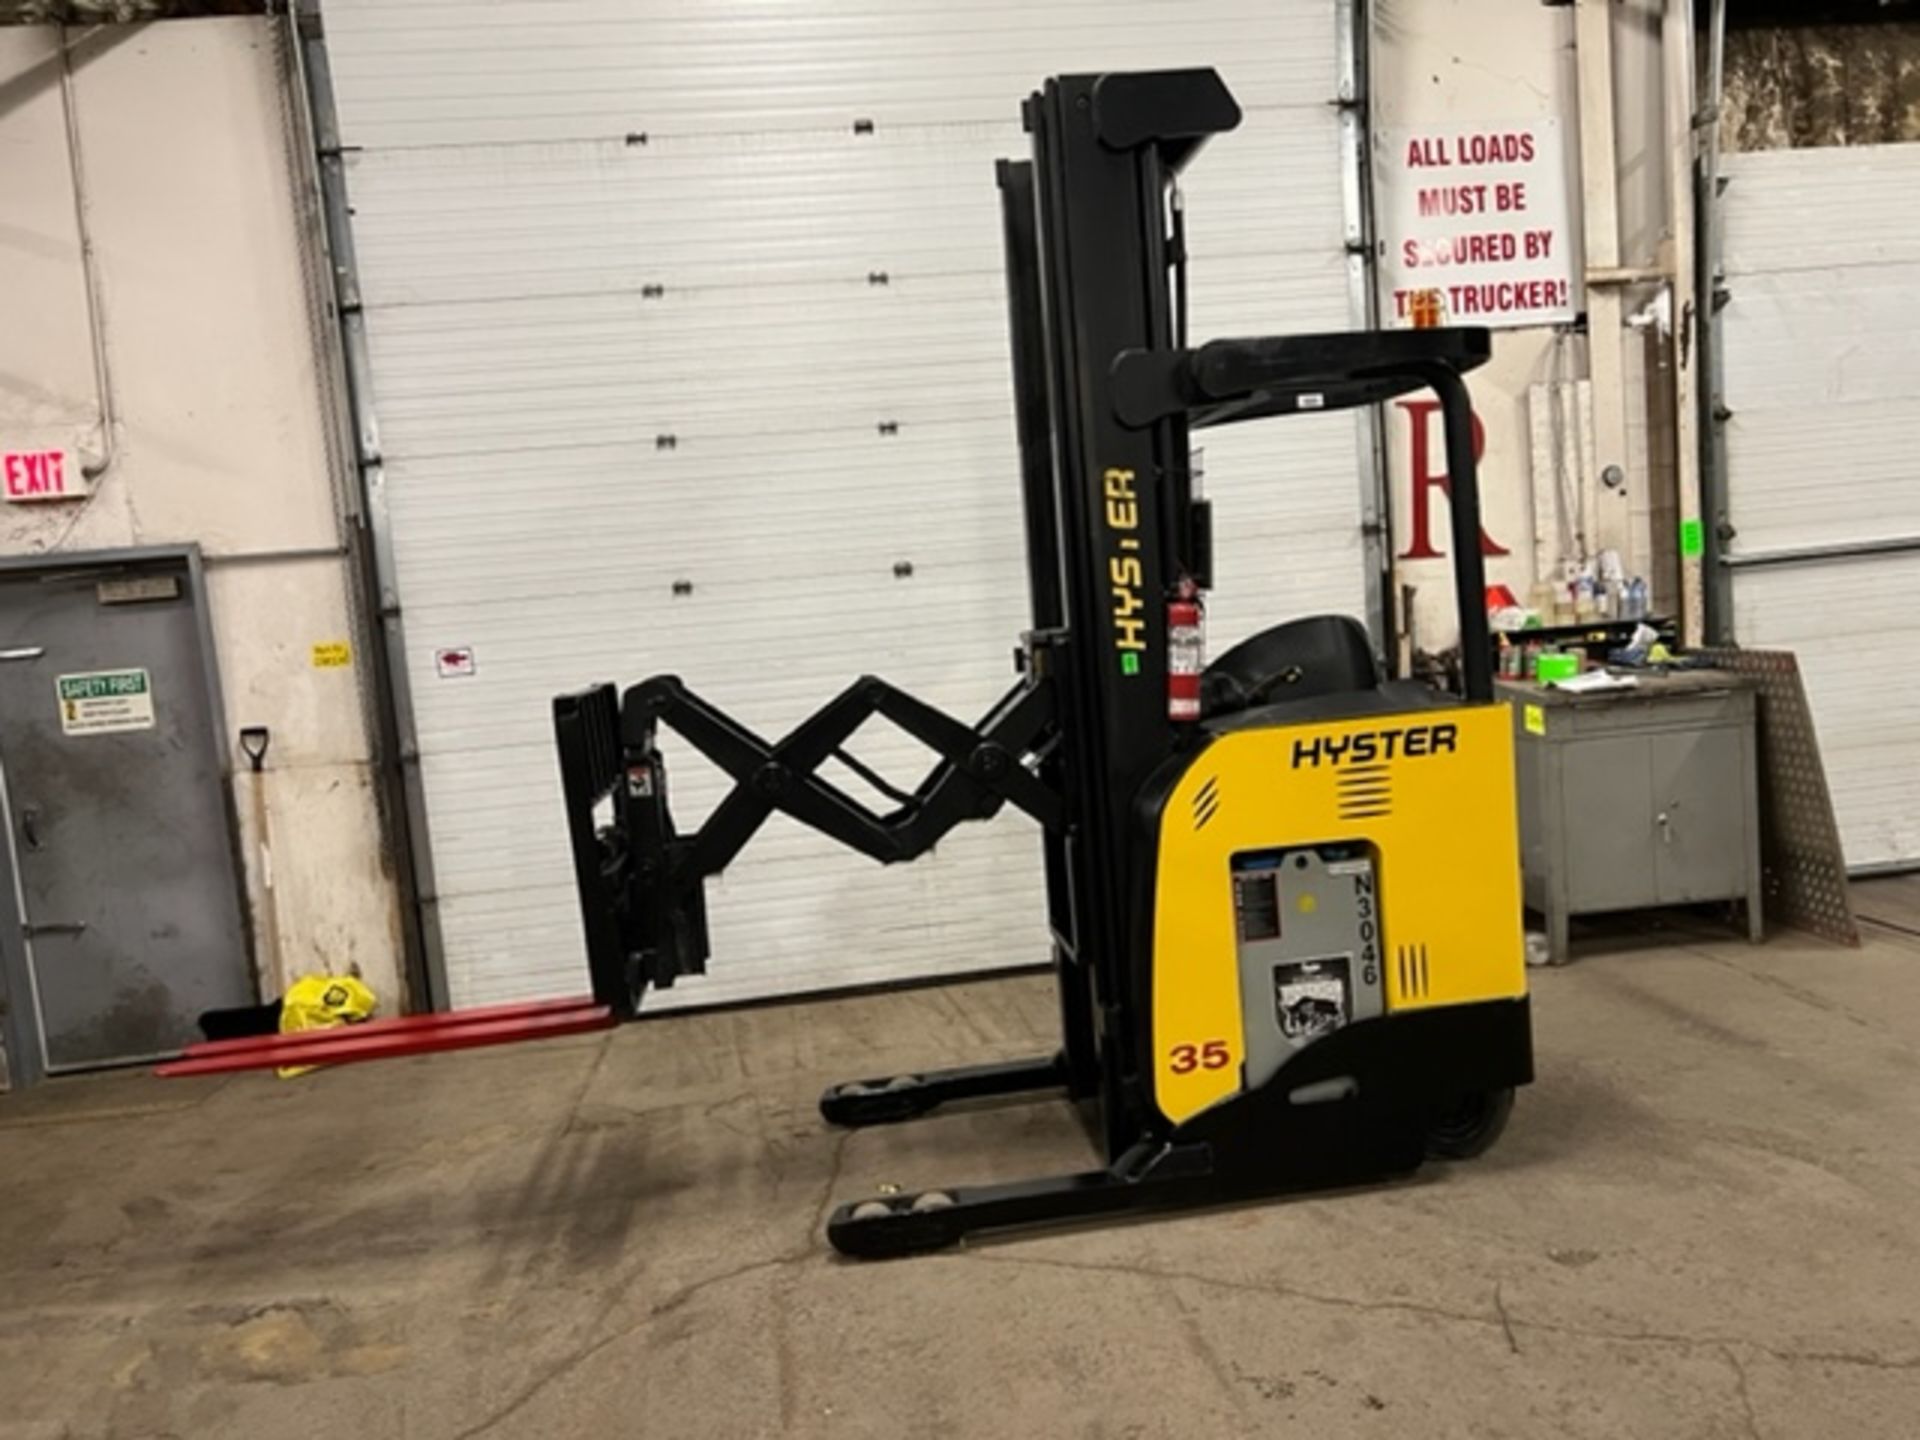 FREE CUSTOMS - 2015 Hyster 35 EXTRA Reach Truck Pallet Lifter 3500lbs capacity electric MINT machine